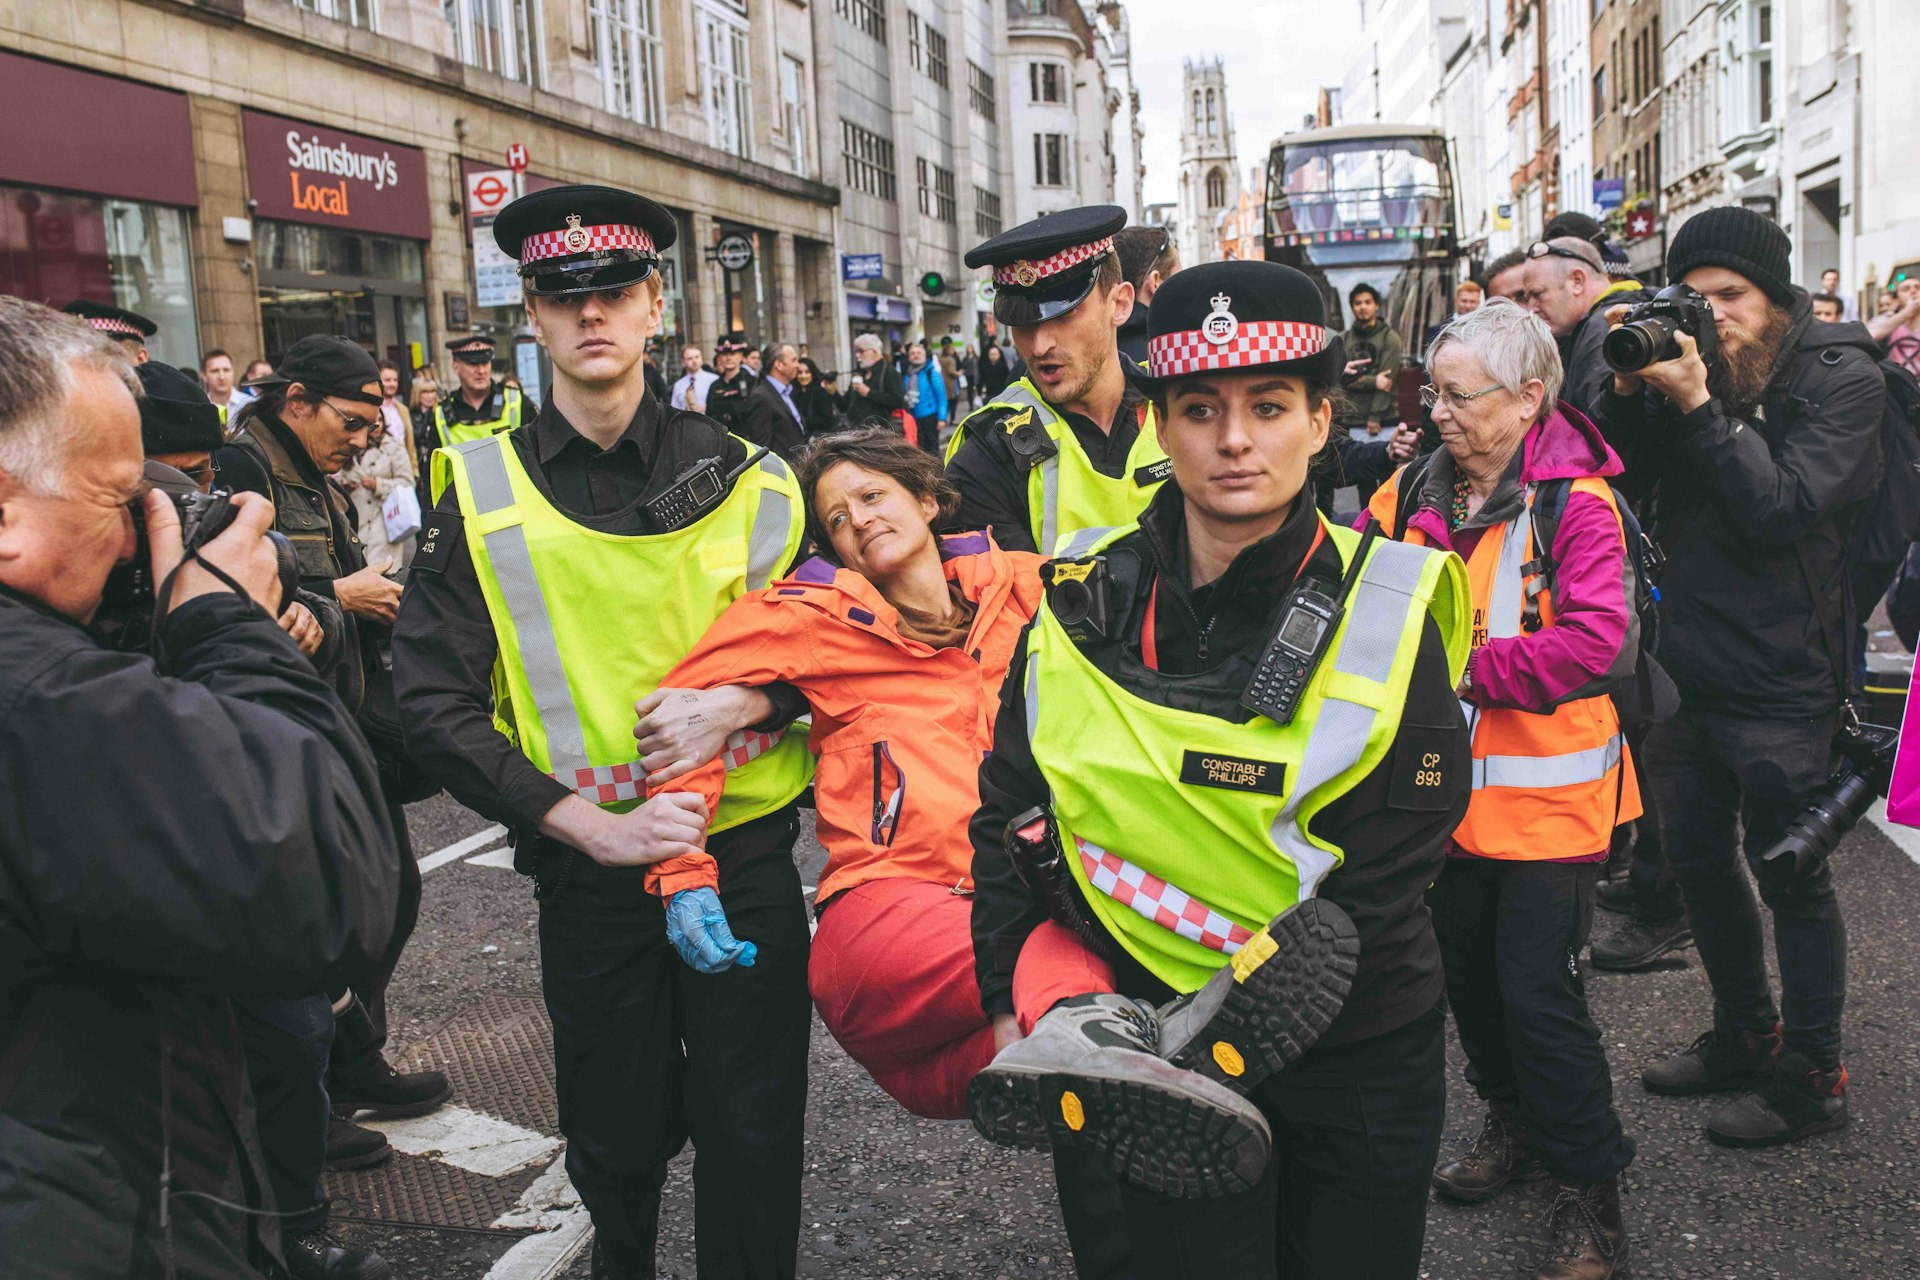 So what comes next for Extinction Rebellion?